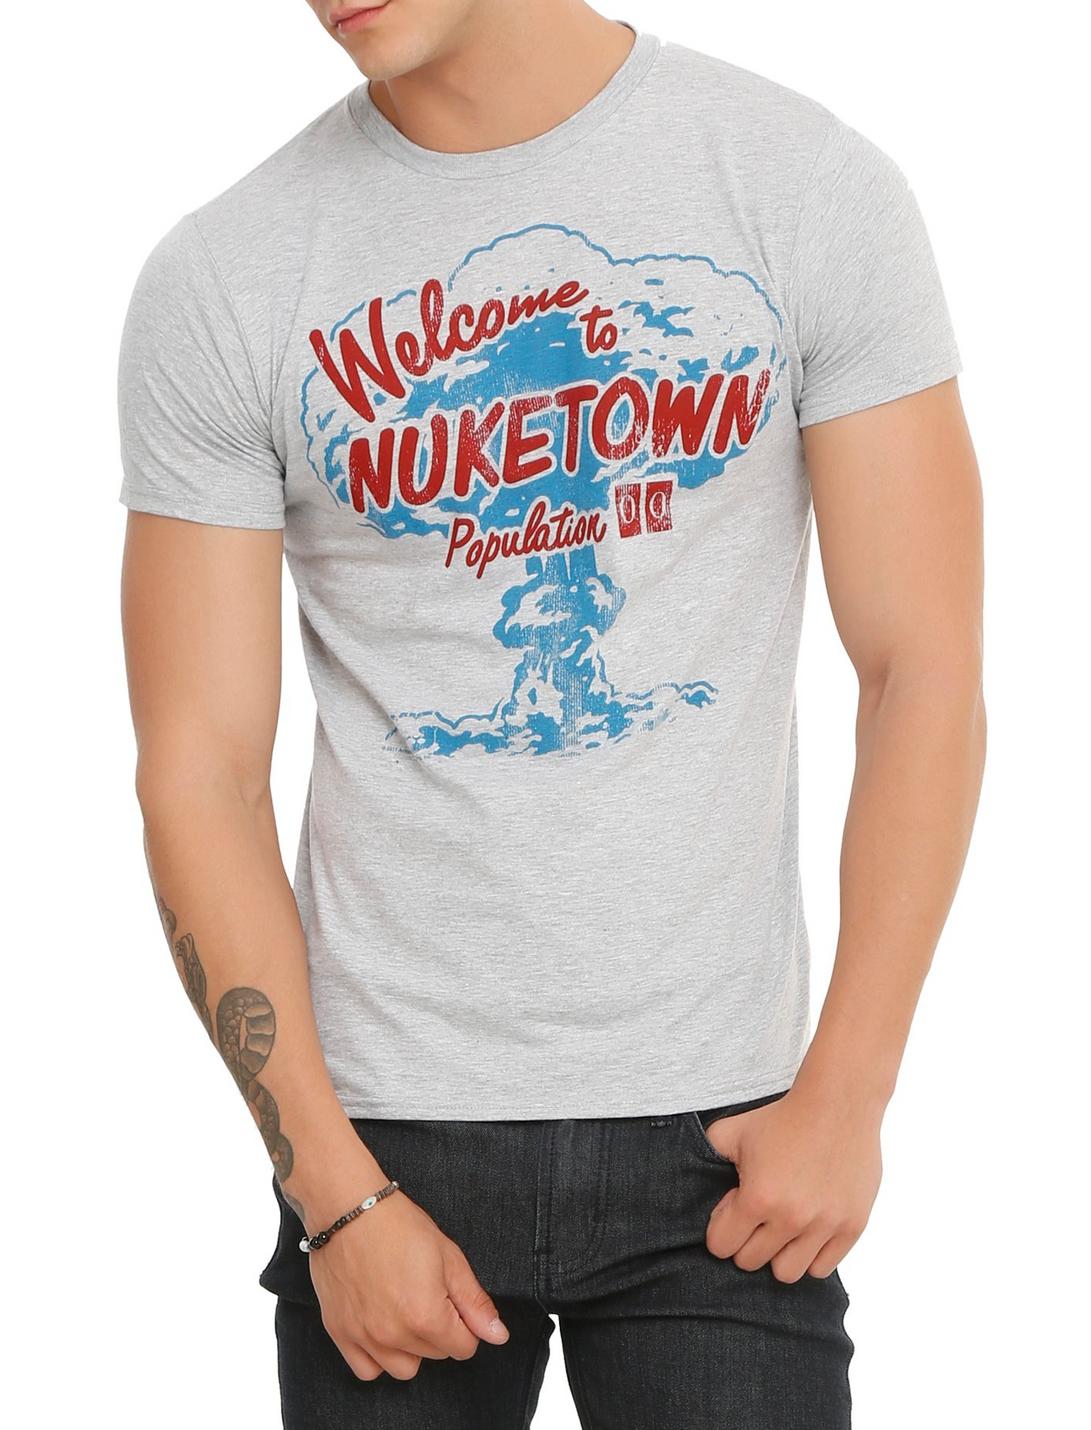 Call Of Duty: Black Ops III Welcome To Nuketown T-Shirt, BLACK, hi-res